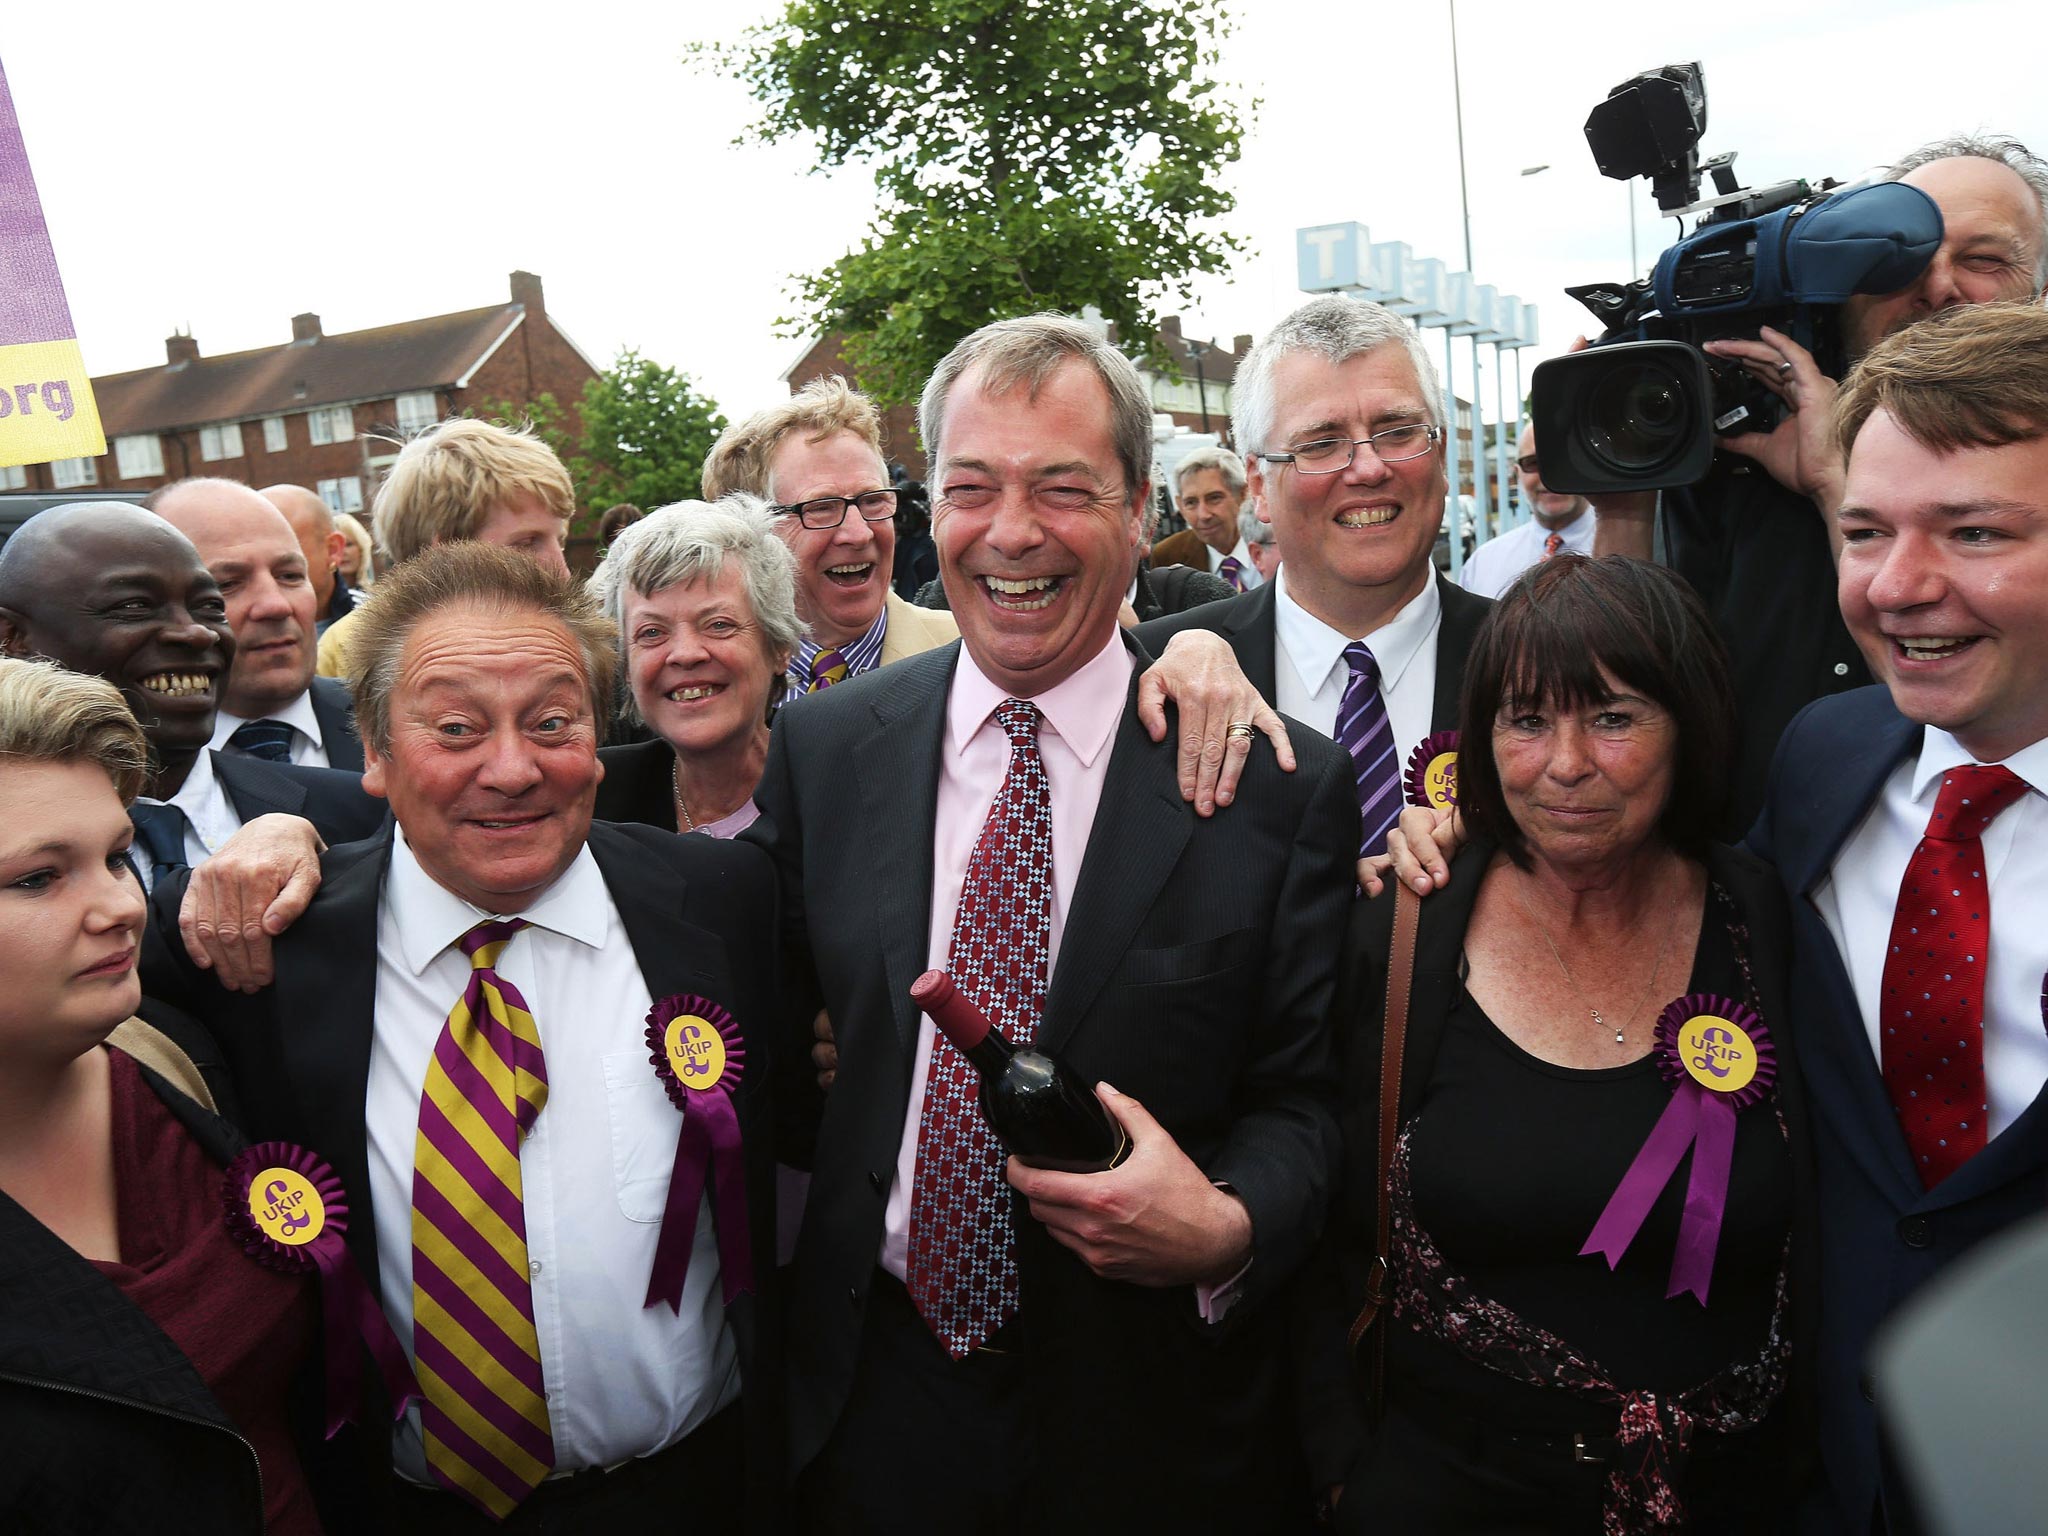 Nigel Farage celebrates with local councillors in South Ockenden